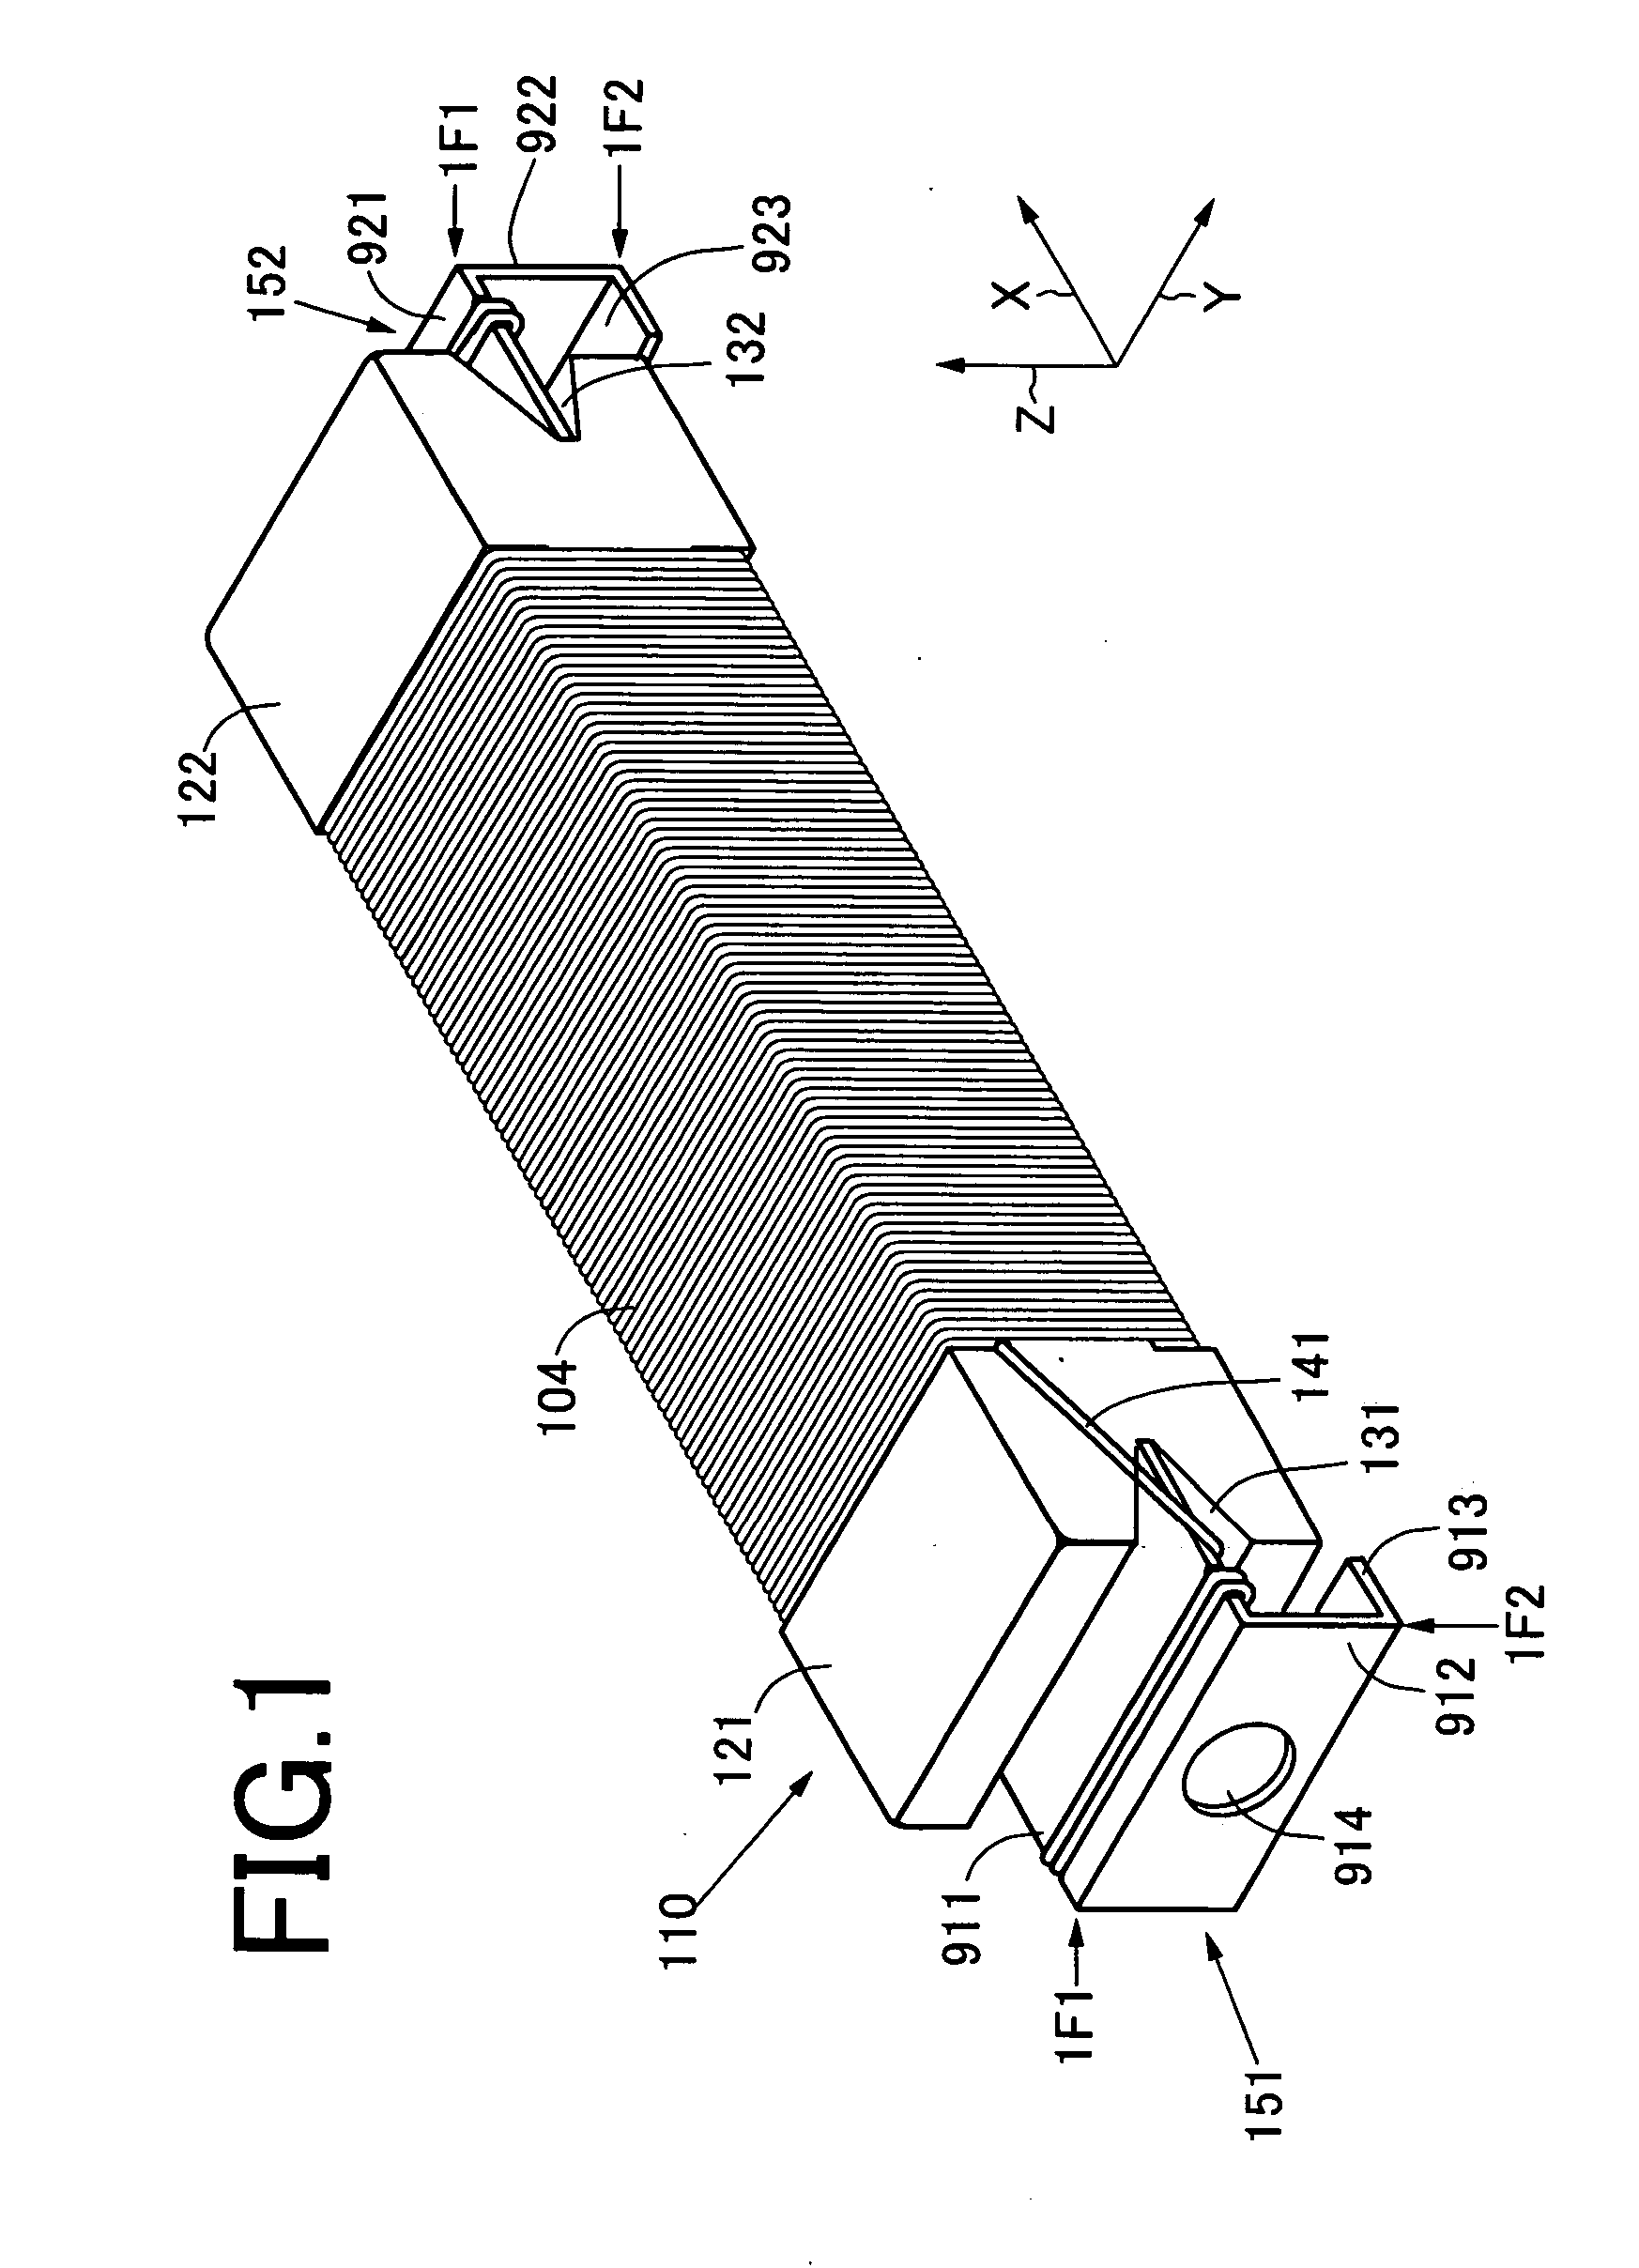 Coil device